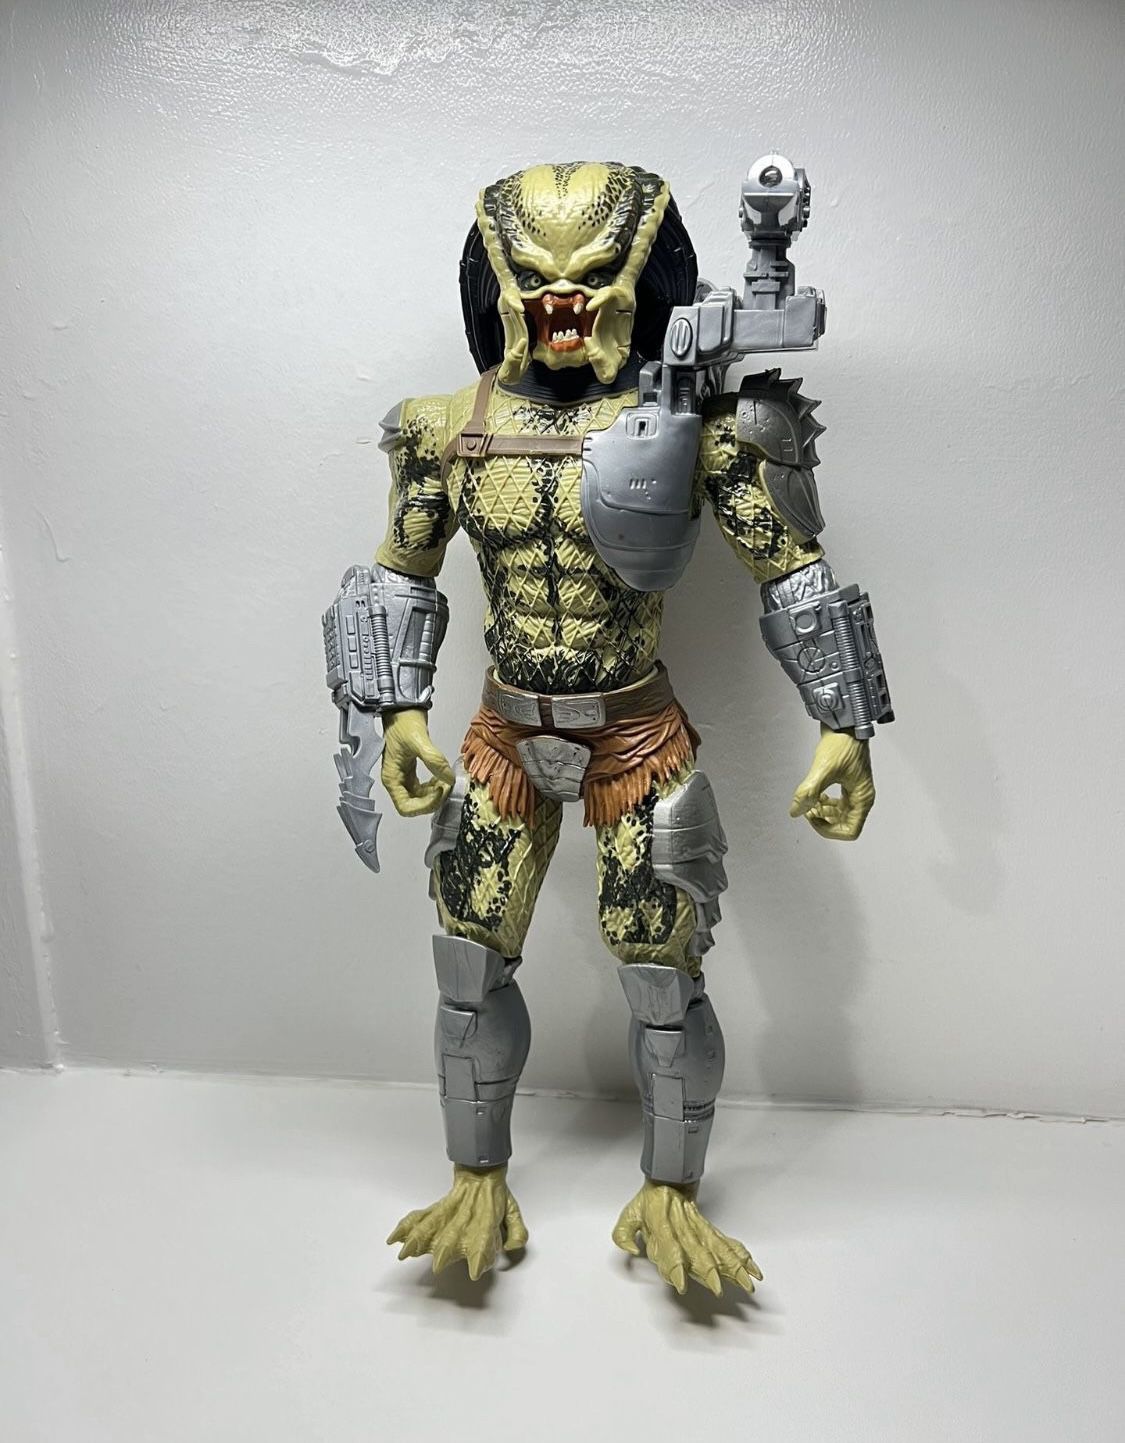 Lanard Predator 12" Poseable Figure with Open Action Jaw 2020Collection